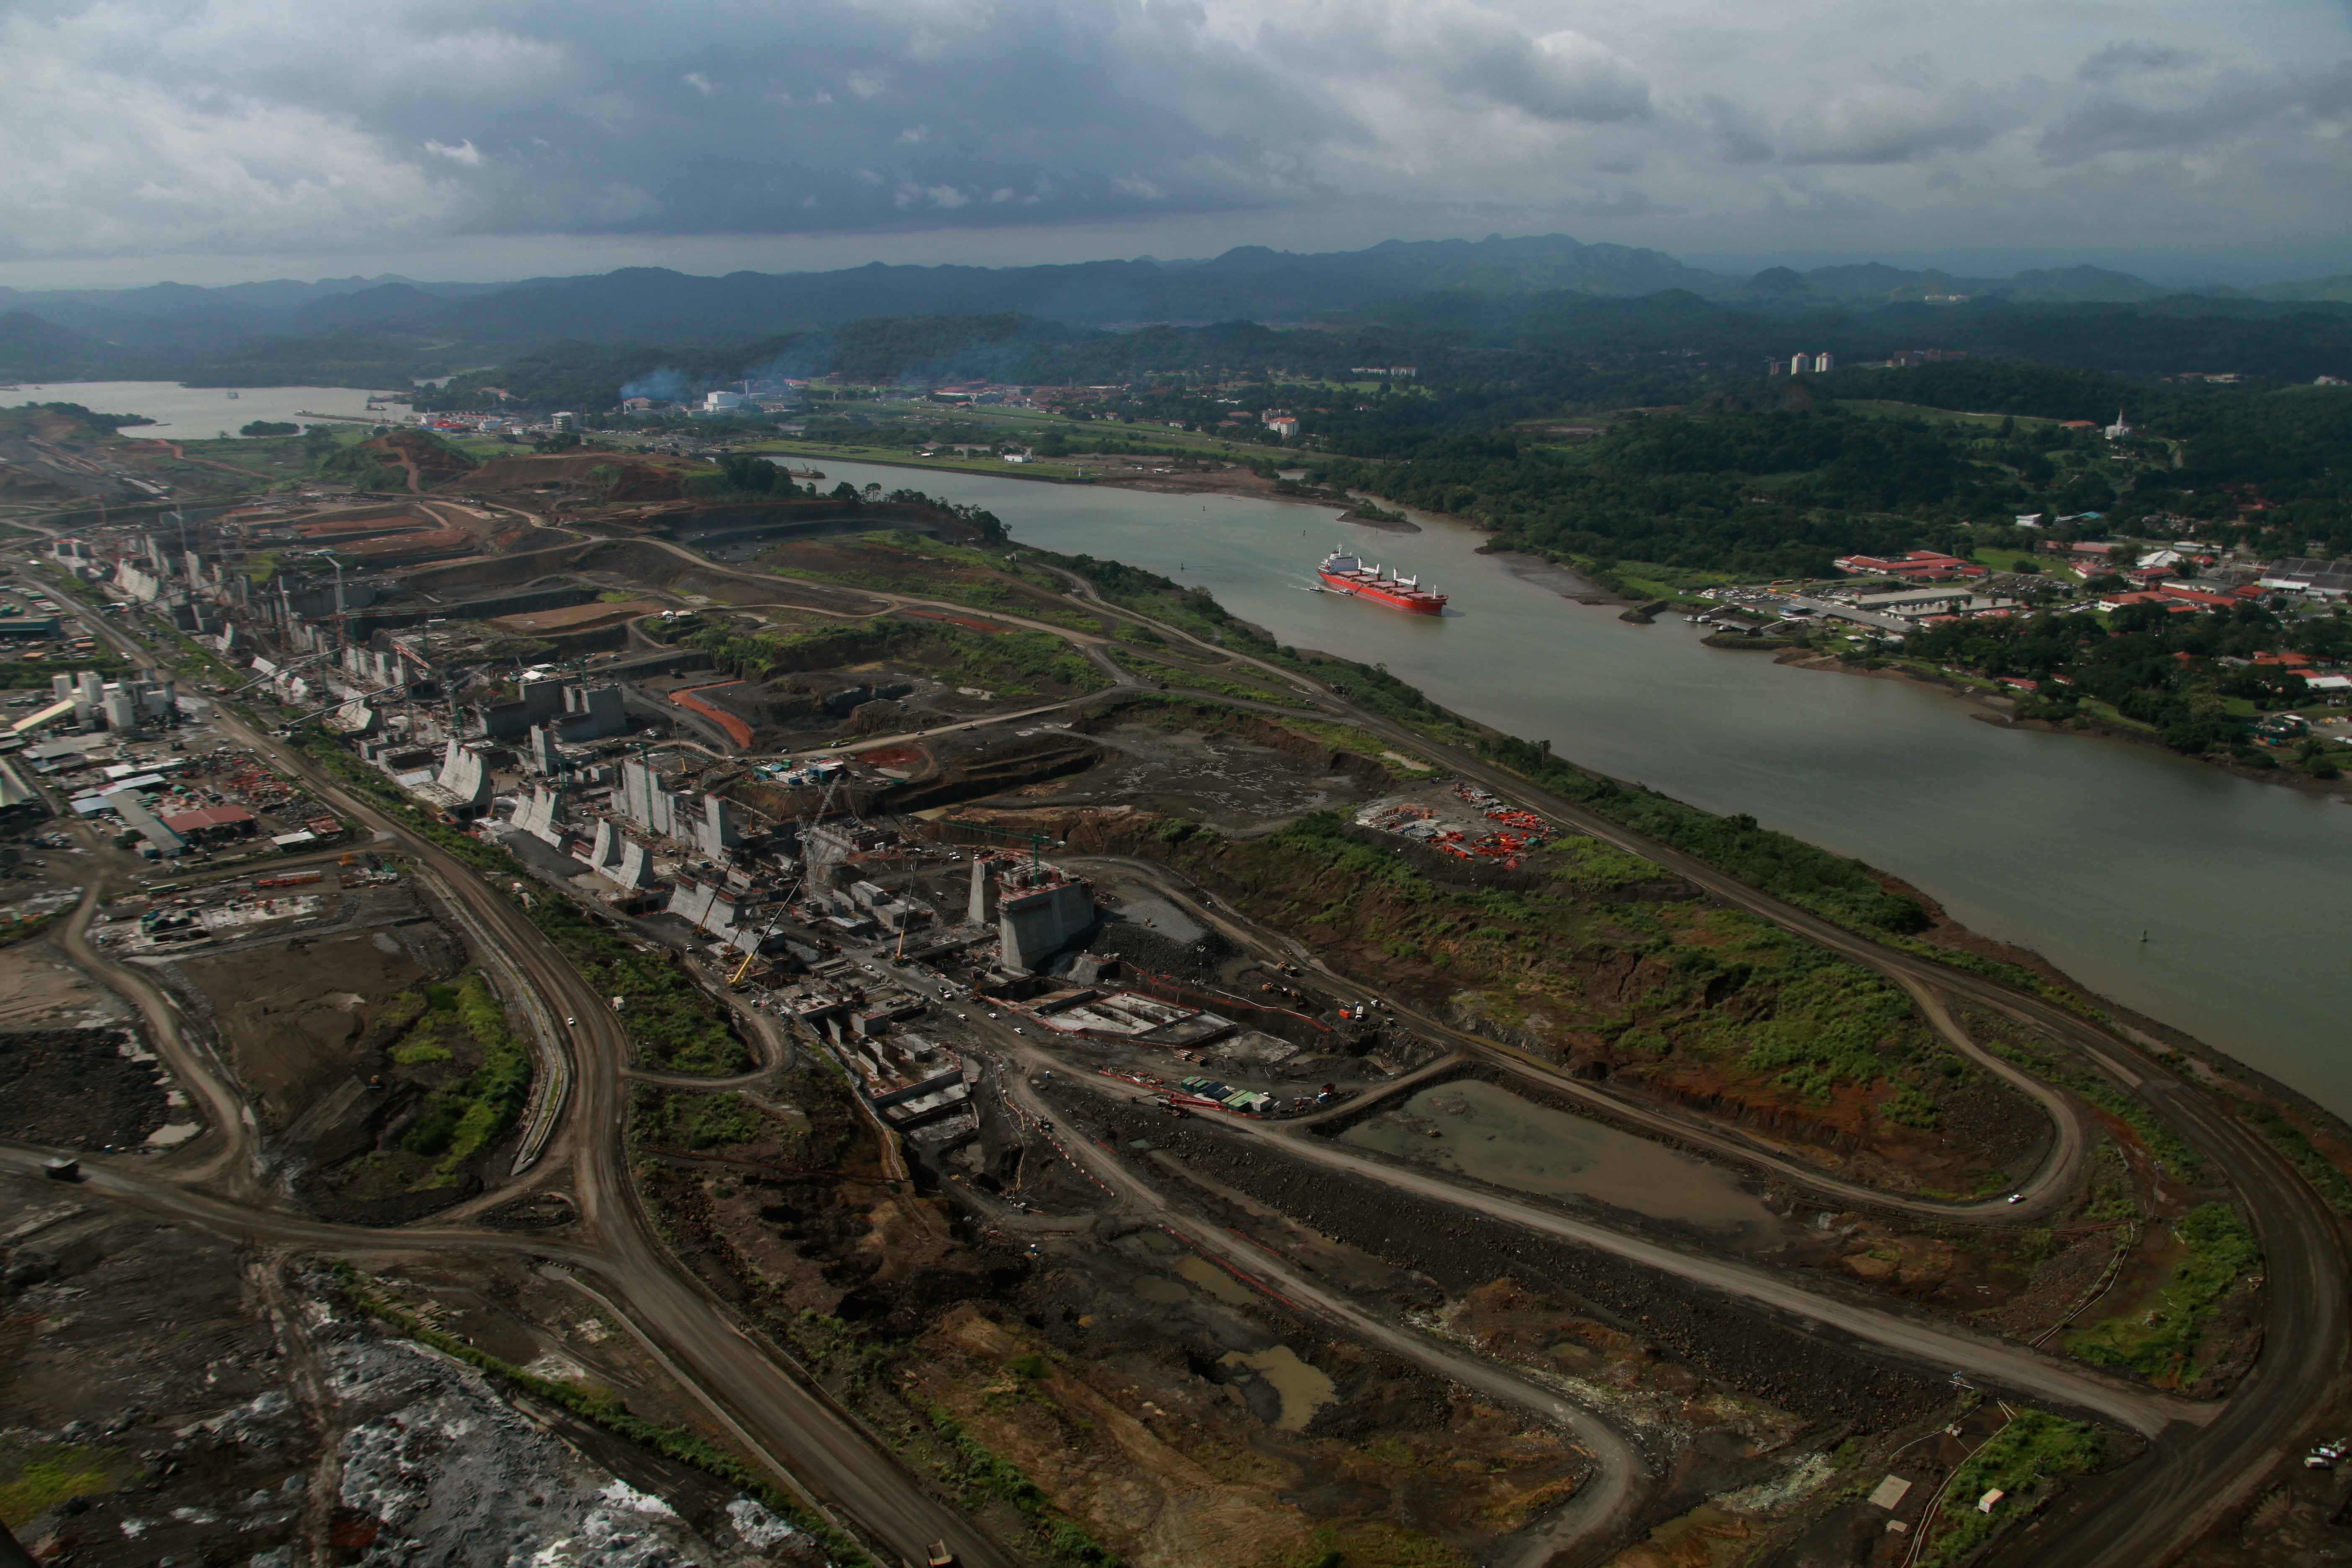 Breathtaking views of Panama Canal - Photo 24 - Pictures - CBS News